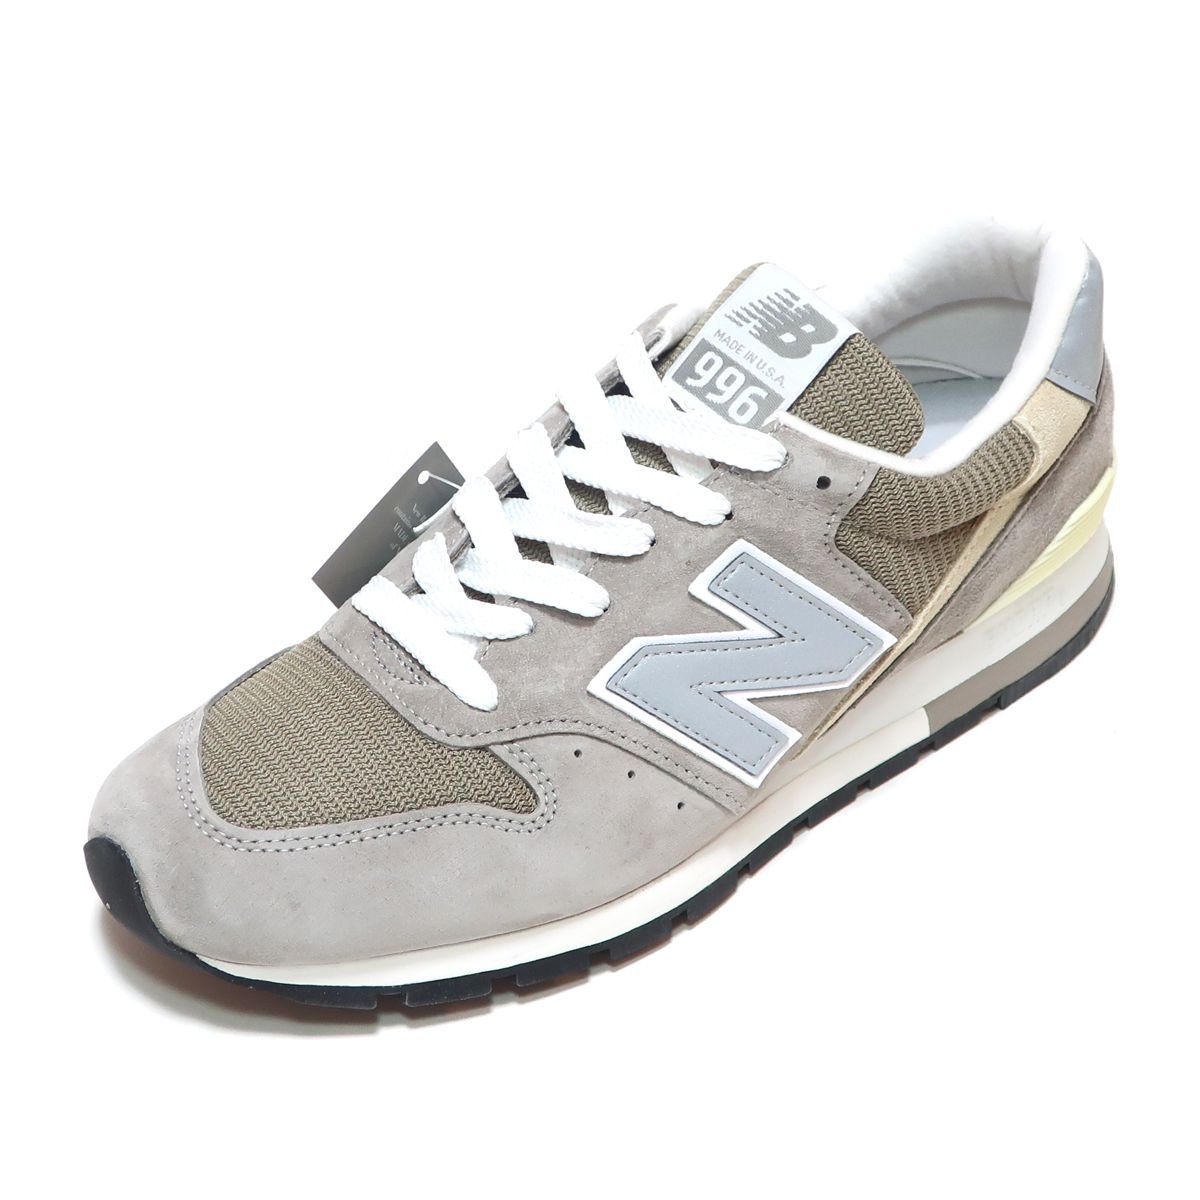 NEW BALANCE U996GR GRAY GREY SUEDE MADE IN USA US12 30cm ( ニューバランス 996 グレー  スエード アメリカ製 )